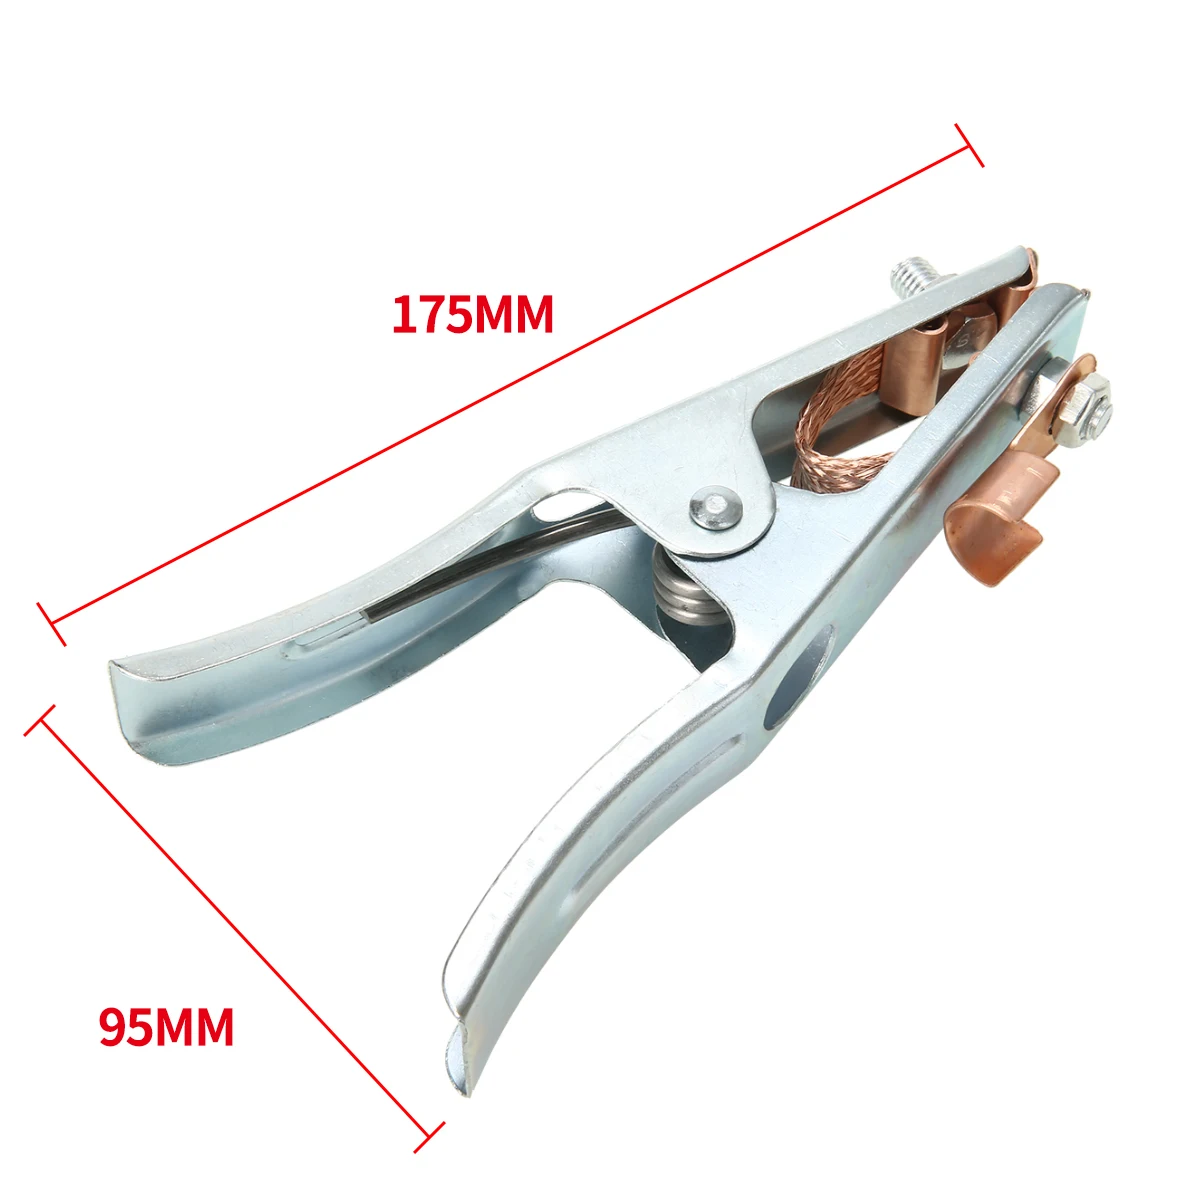 MOBILEACCESSORIES TENGLIN 300Amp Earth Ground Cable Clip Clamp 175mm Welding Manual Welder for Welding Machine Professional Use Electrode Holders